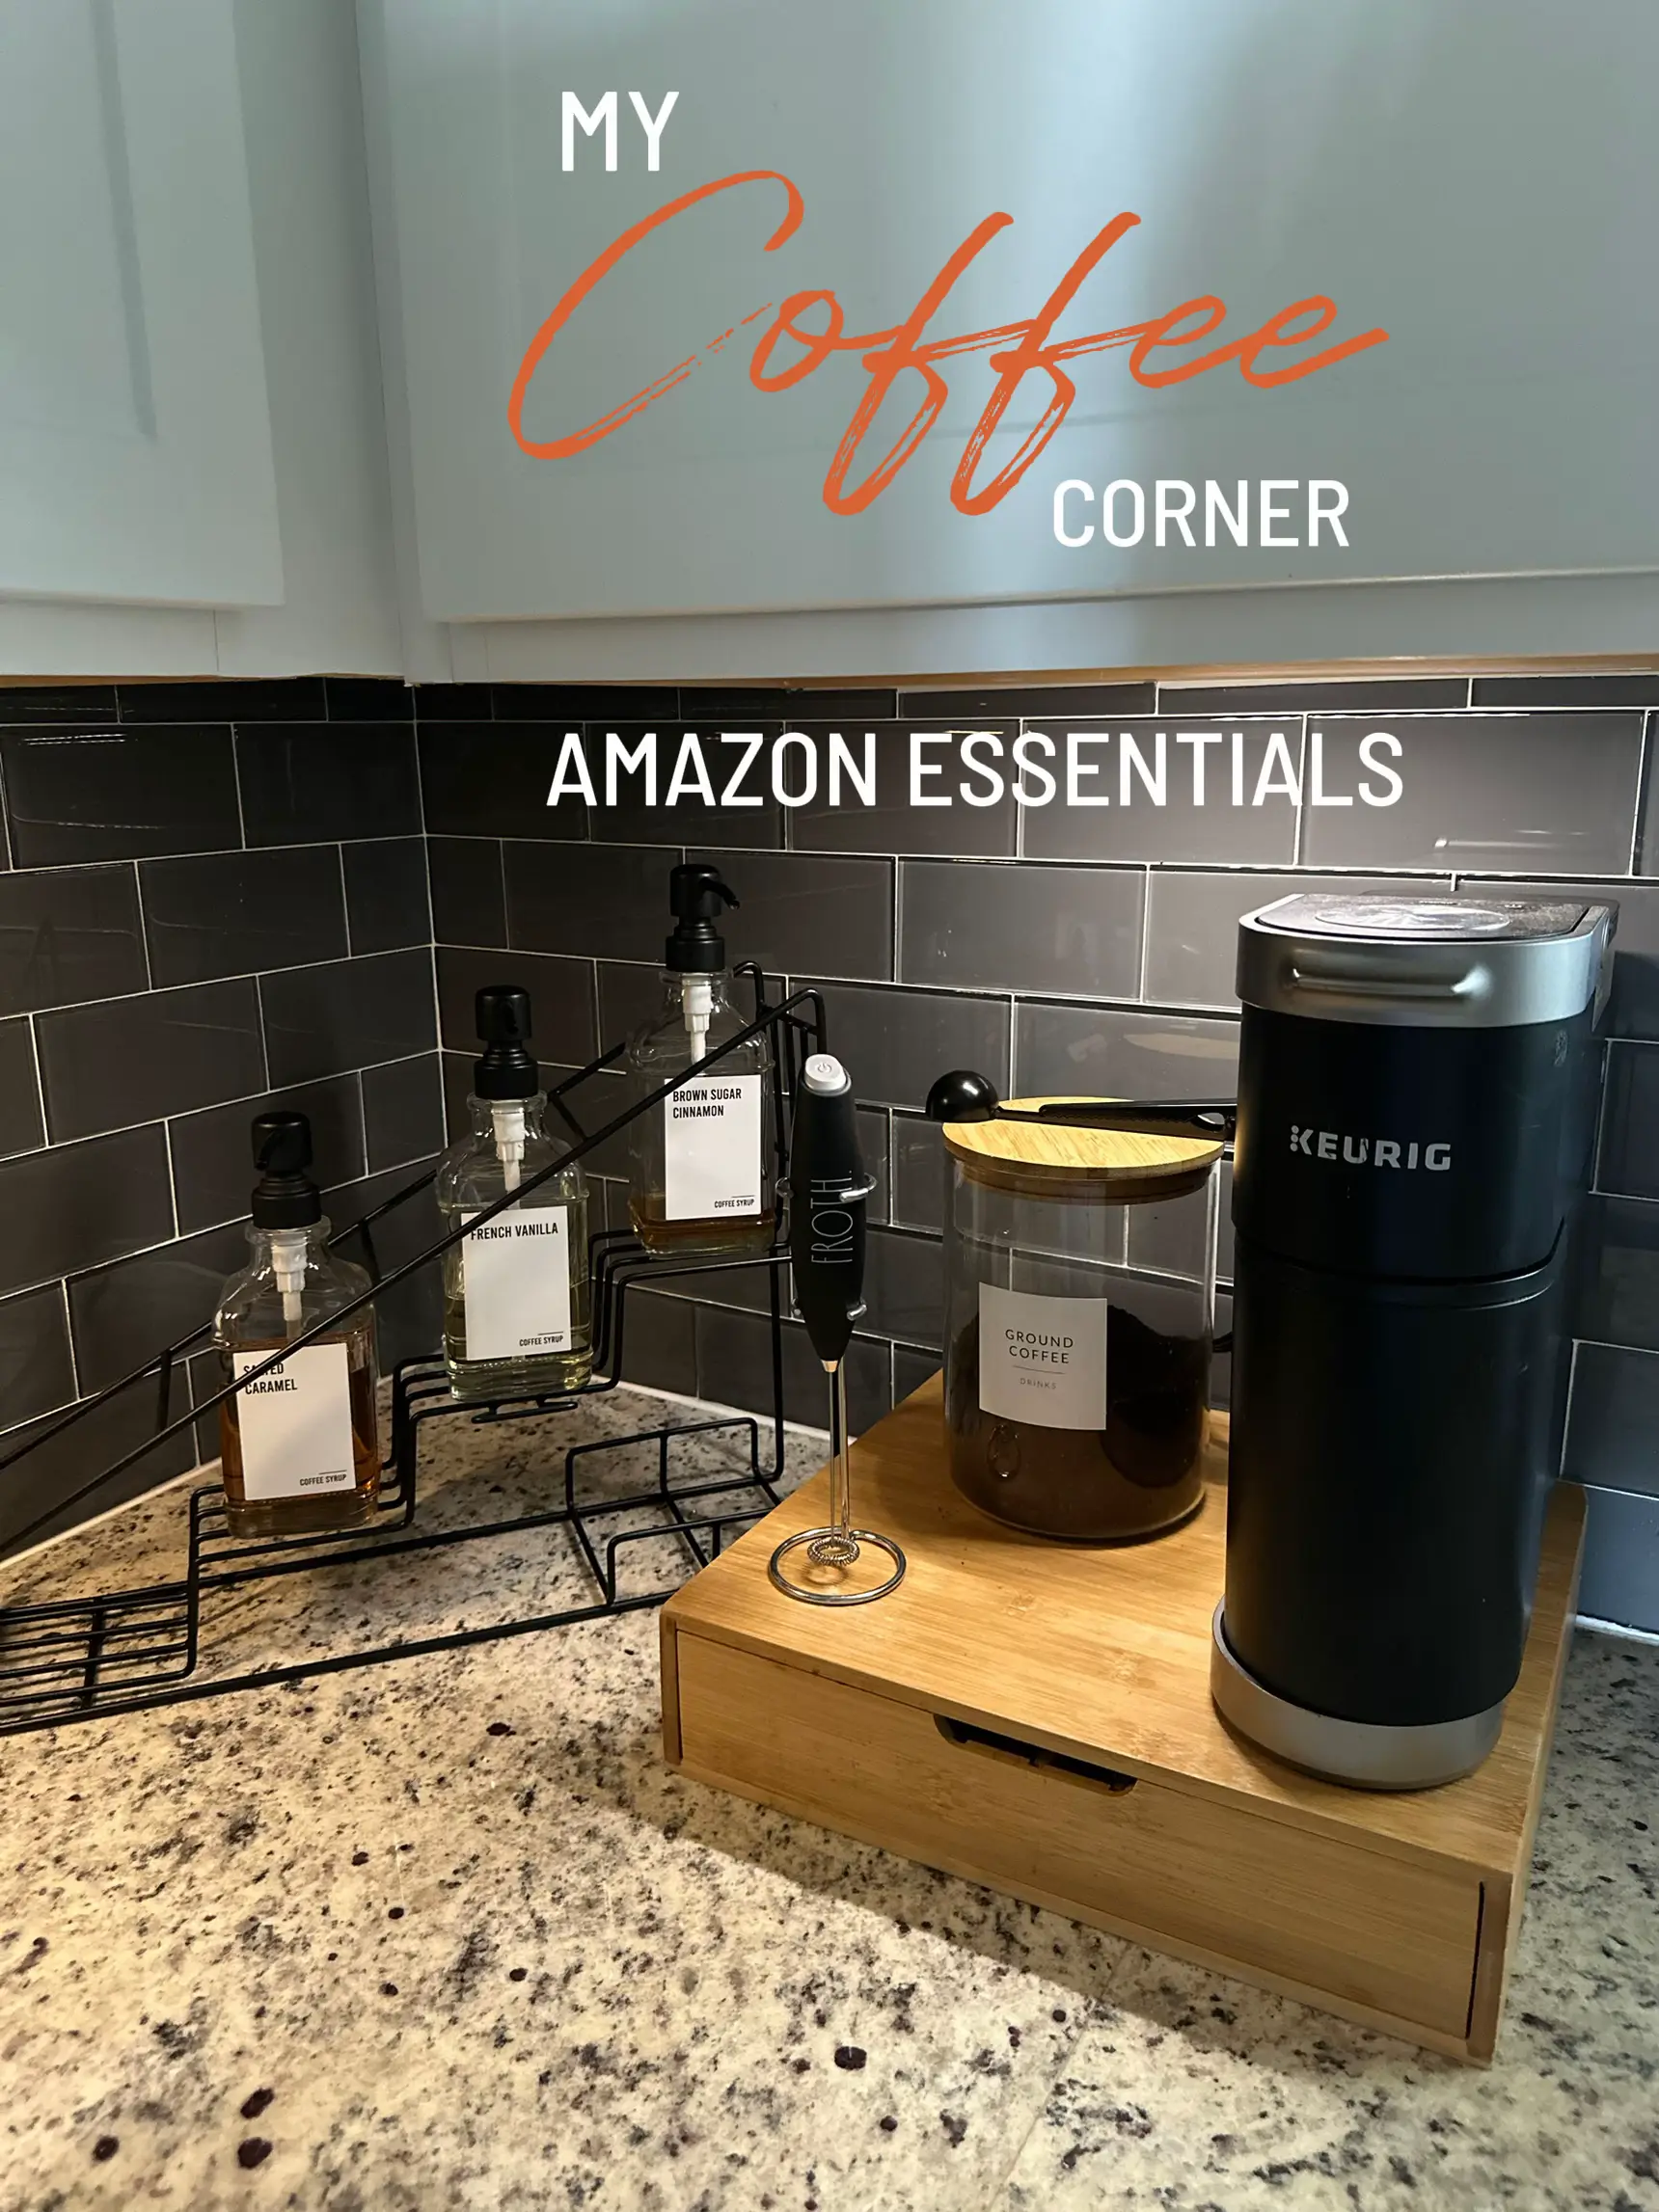 The essentials of a home coffee corner